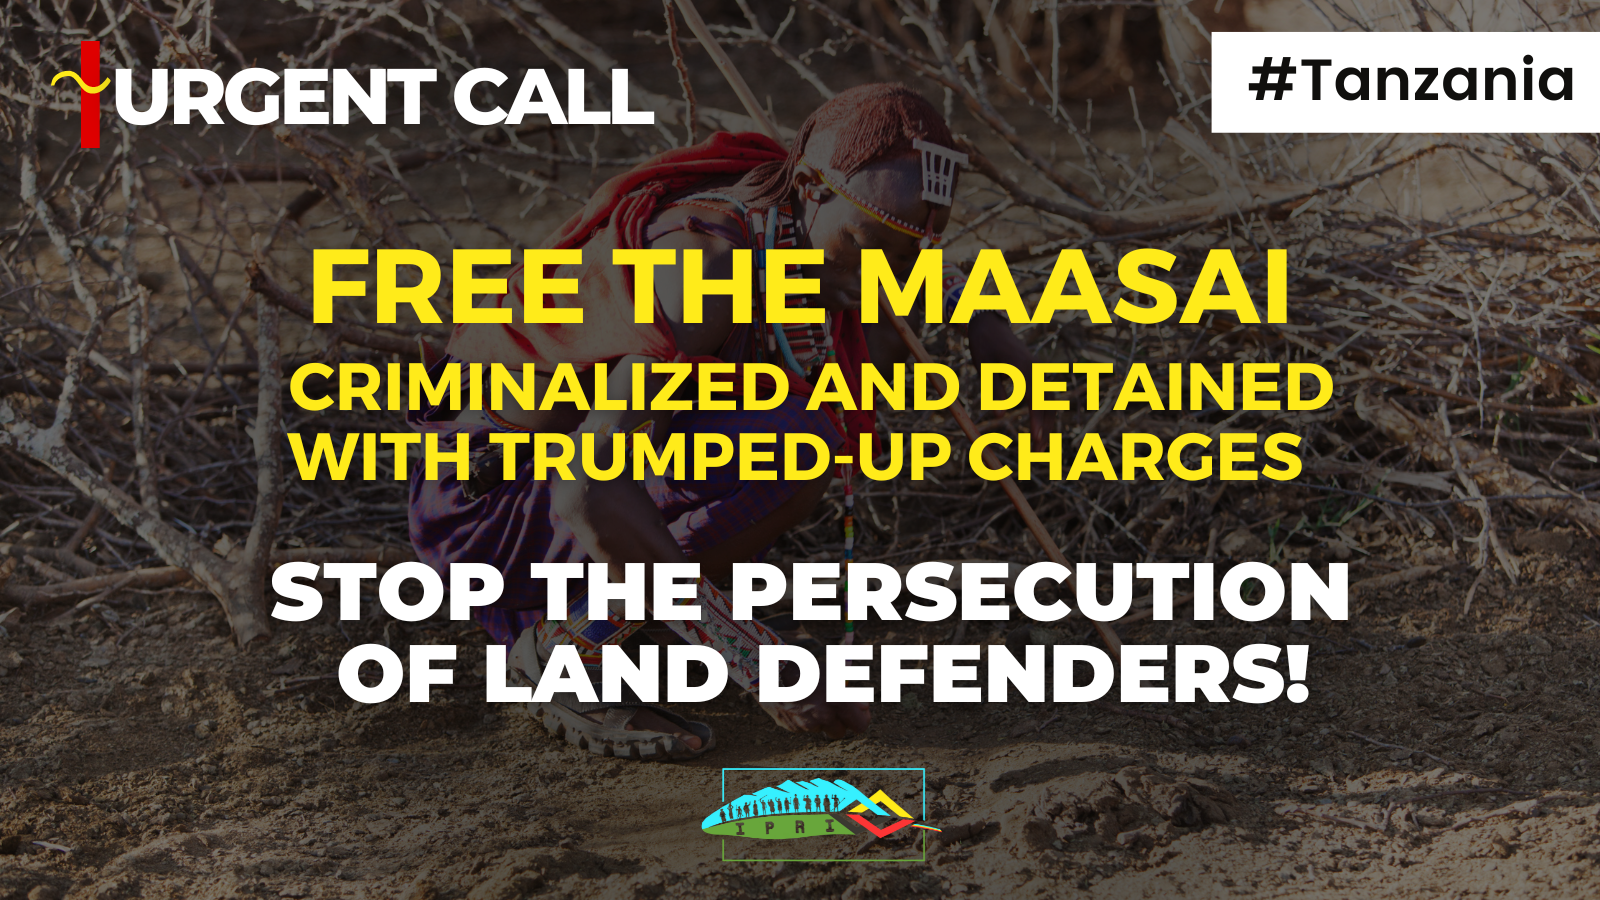 URGENT CALL || Free The Maasai Criminalized And Detained With Trumped-up Charges. Stop The Persecution Of Land Defenders!